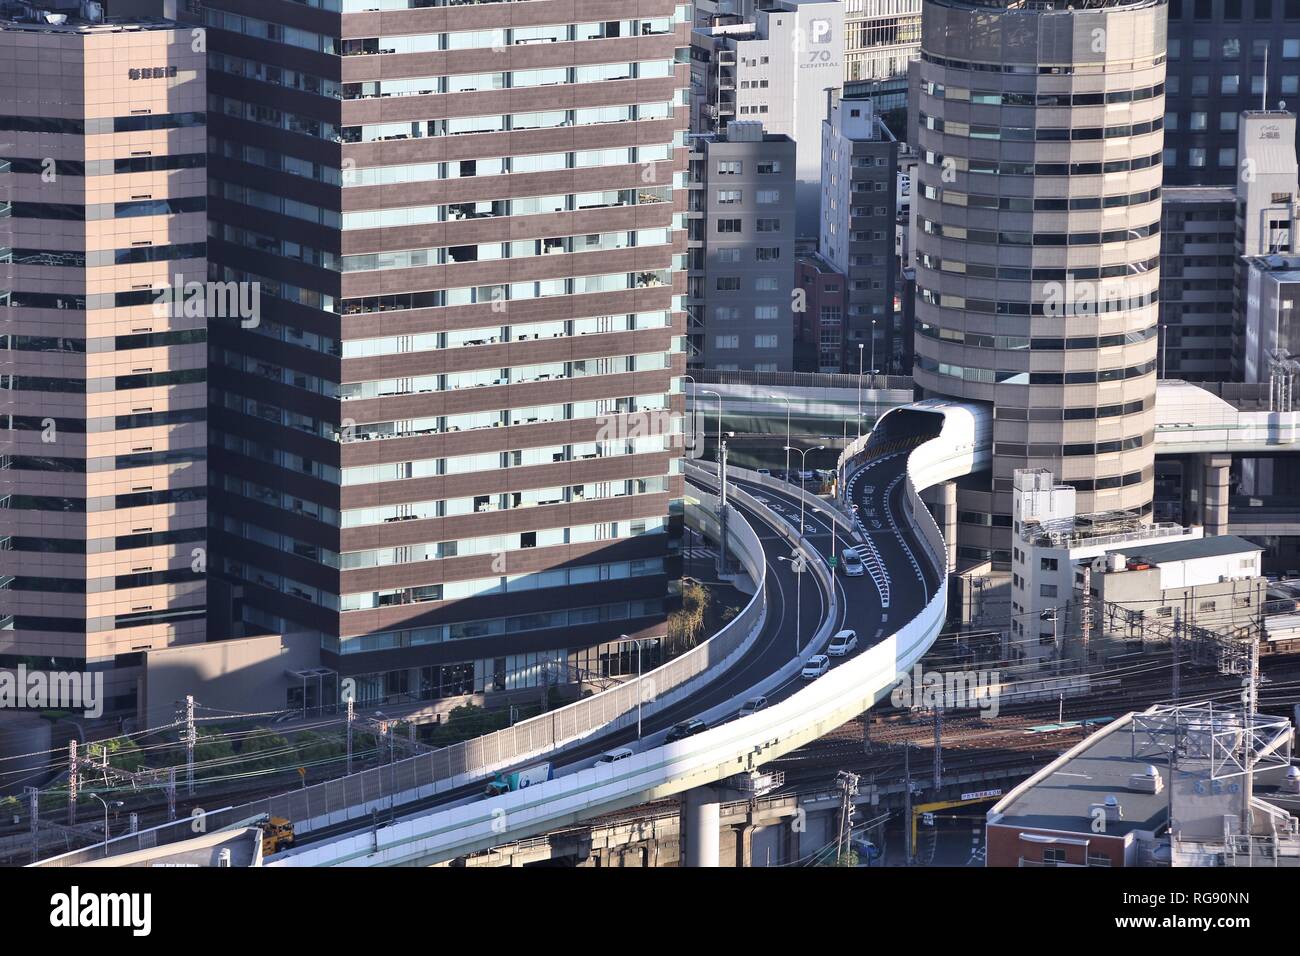 OSAKA, JAPAN - APRIL 27: Cars ride through Gate Tower Building on April 27, 2012 in Osaka, Japan. The building is extremely popular because of highway Stock Photo